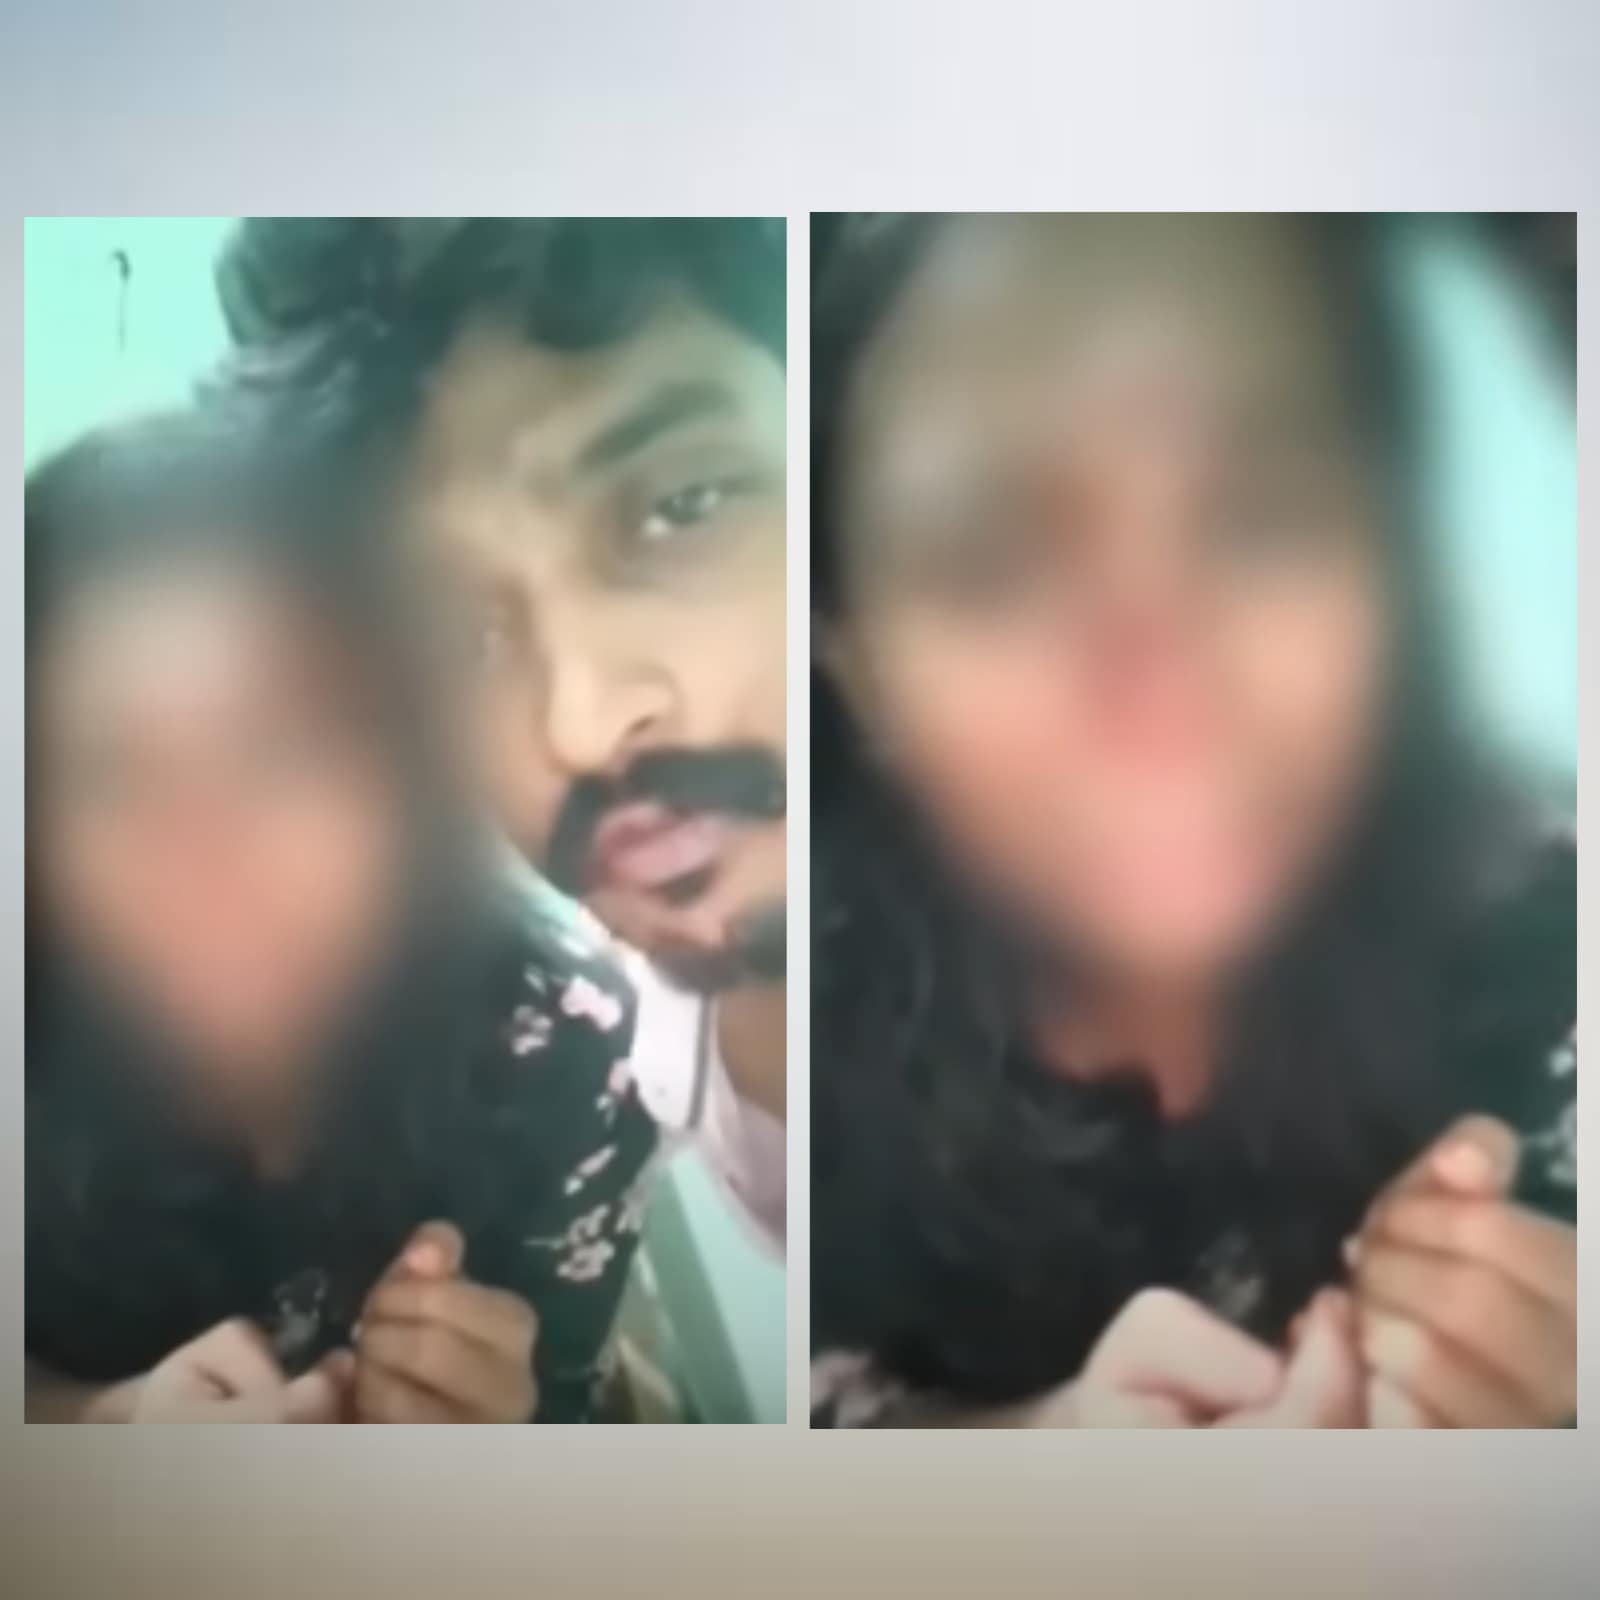 Kerala Man Thrashes Wife, Films Assault, Shares Video With Friends photo